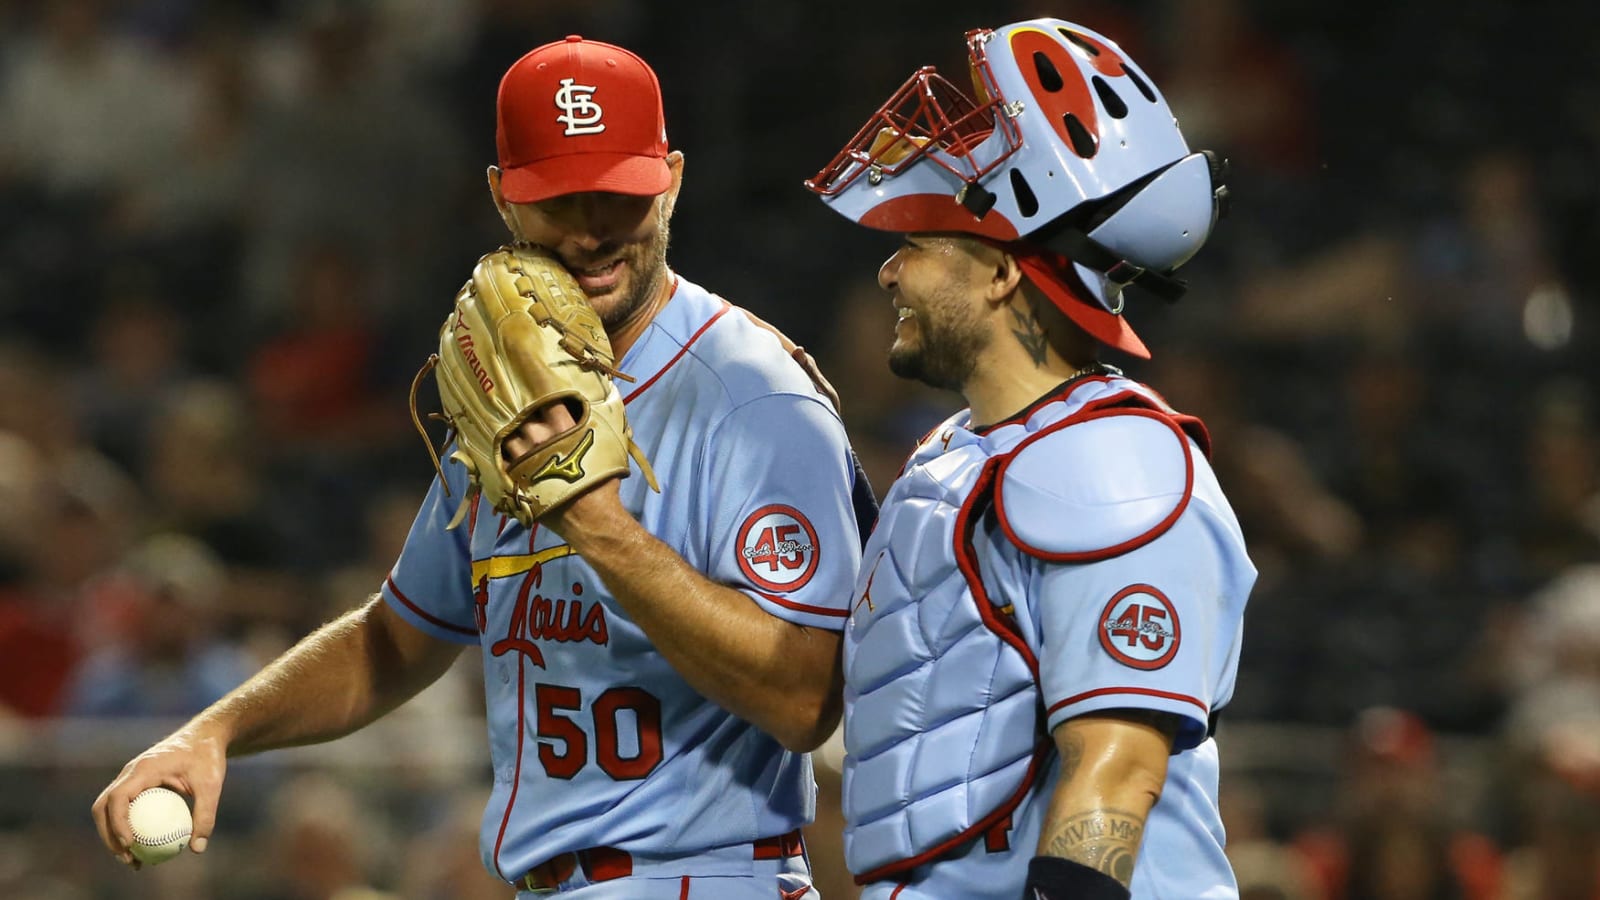 Yadier Molina is Compromised, and it is a Big Problem